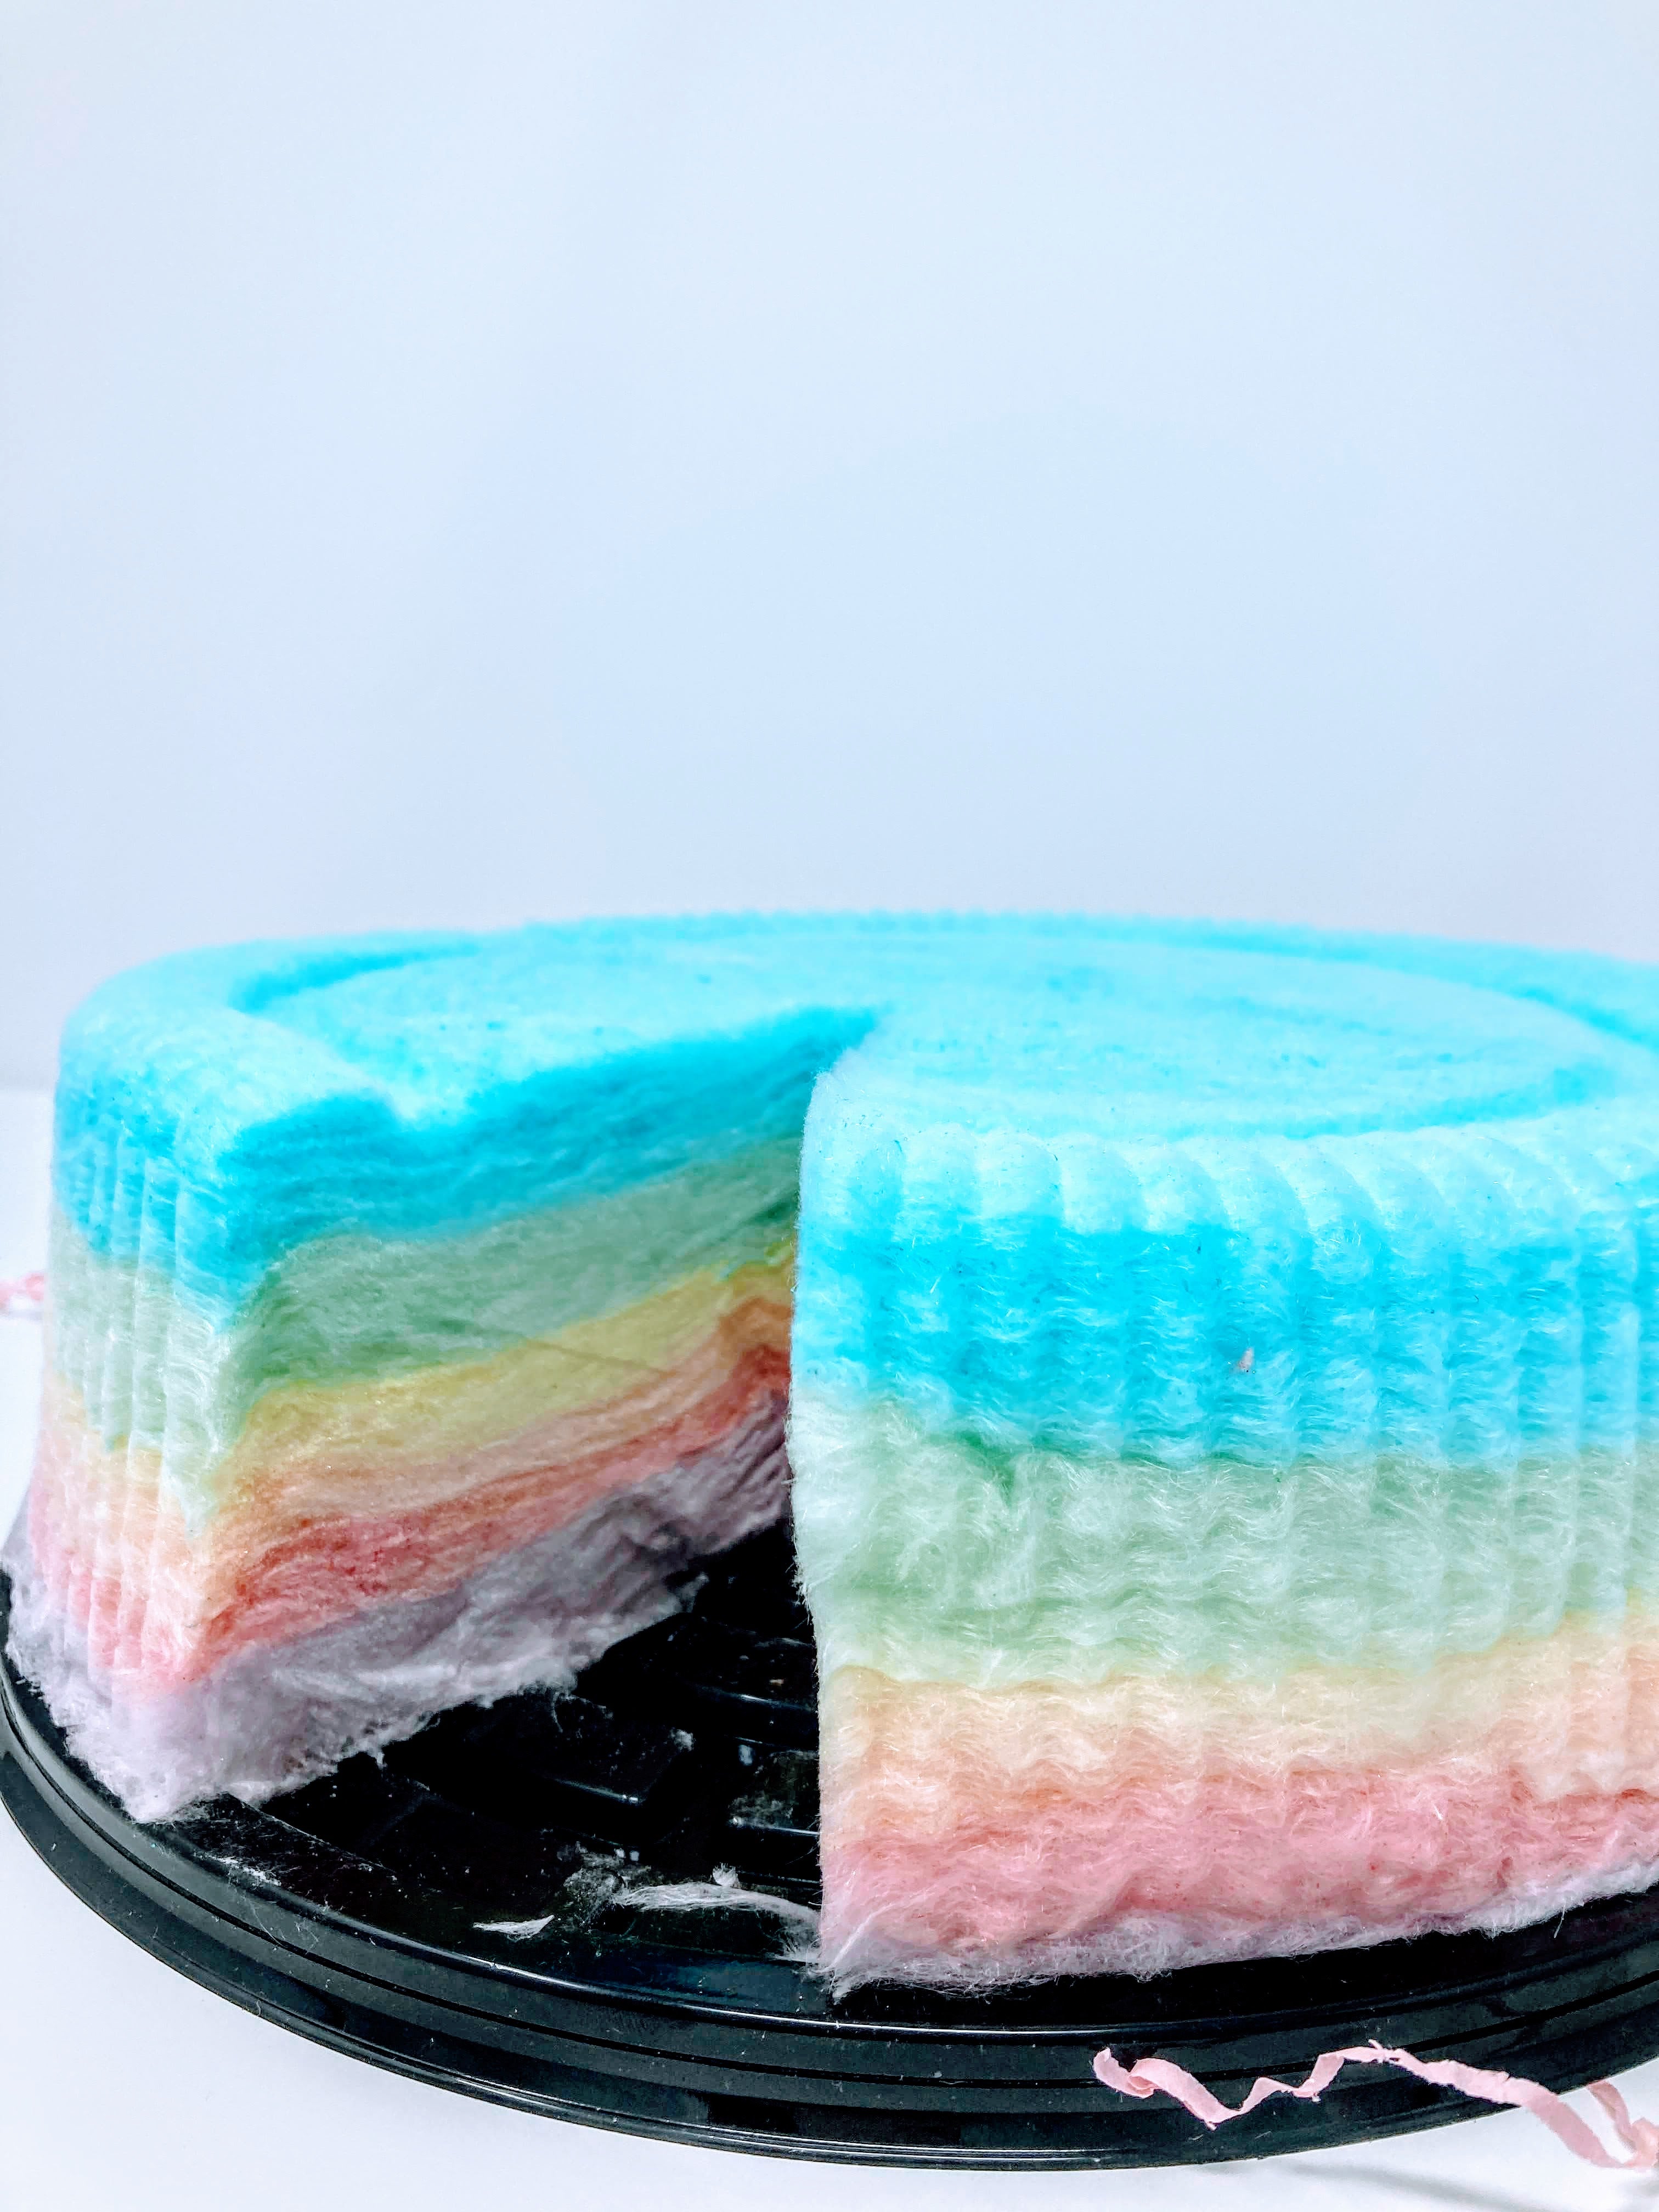 Create your own Cotton Candy Cake! Choose from 30+ flavors – Cotton Candy  Cake Shop